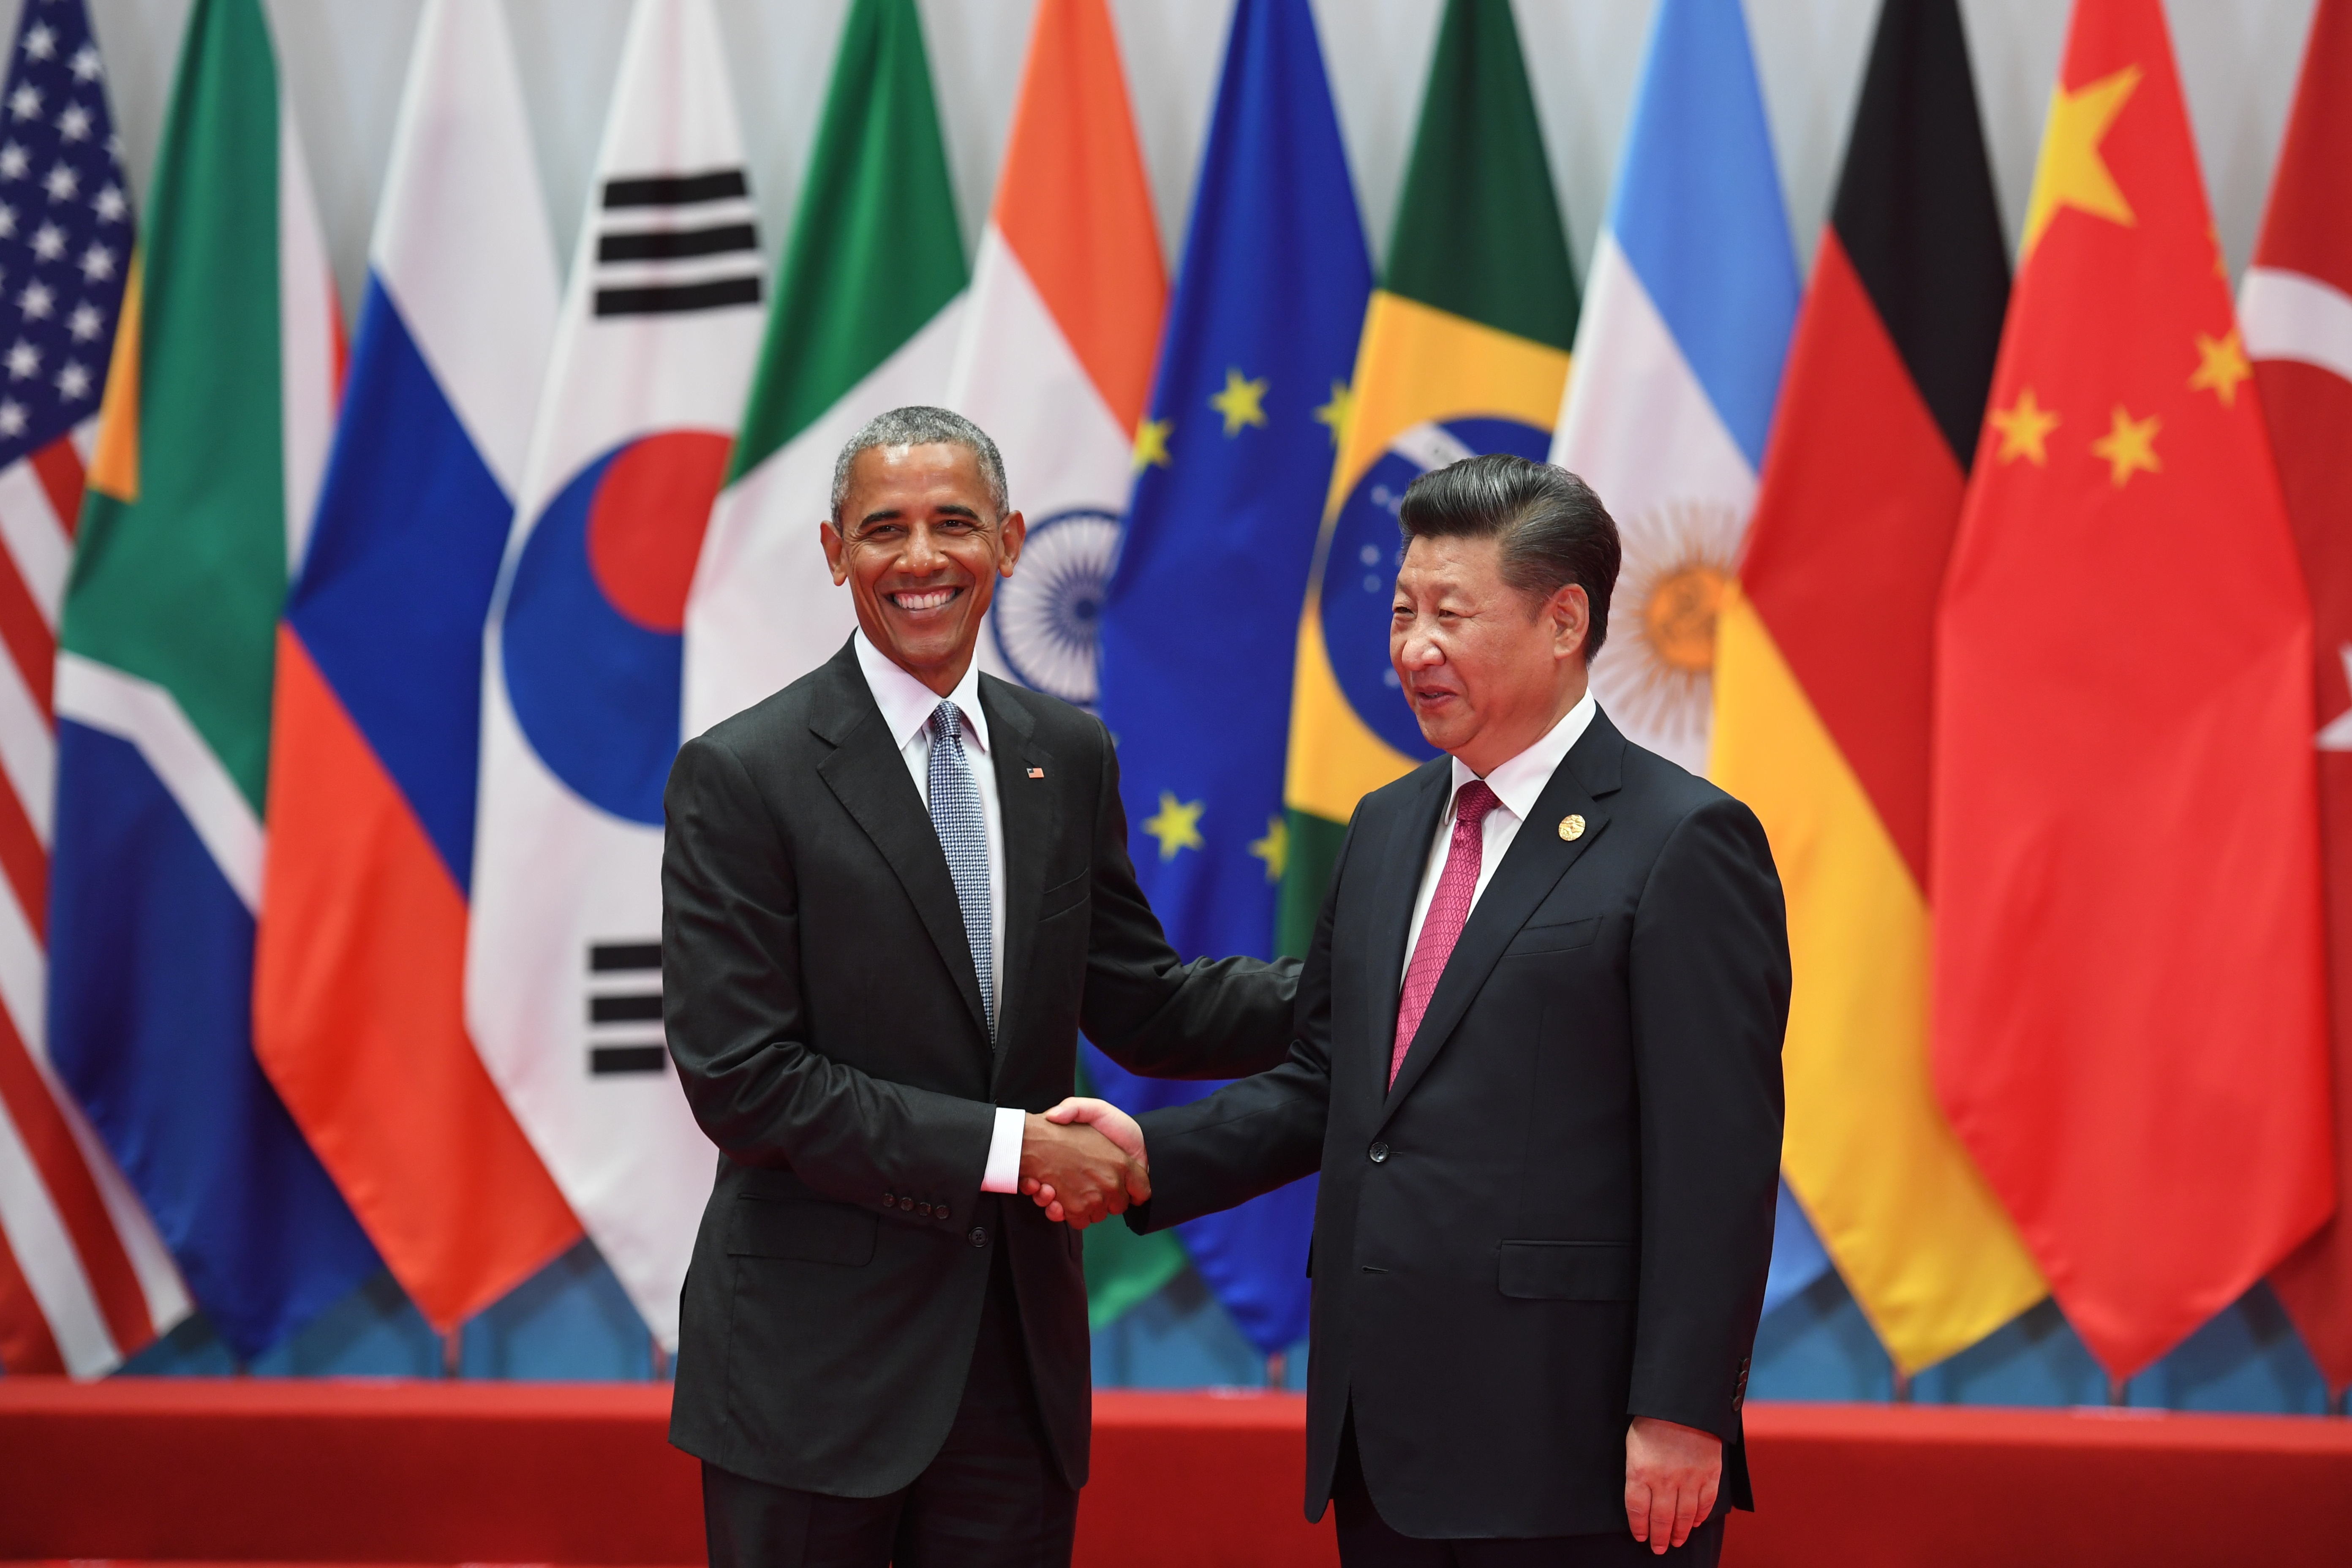 (FILES) This file photo taken on September 04, 2016 shows China's President Xi Jinping (R) shaking hands with US President Barack Obama before the G20 leaders' family photo in Hangzhou on September 4, 2016. Top world leaders meet from Thursday to try to save their cherished free trade accords from feared extinction under US President-elect Donald Trump. Outgoing US President Barack Obama sought to "rebalance" trade towards deals with Asia and the Pacific. But Trump has rejected Obama's signature trade initiative in the Asia-Pacific region, the Trans-Pacific Partnership (TPP), as a "terrible deal." / AFP PHOTO / Greg BAKER